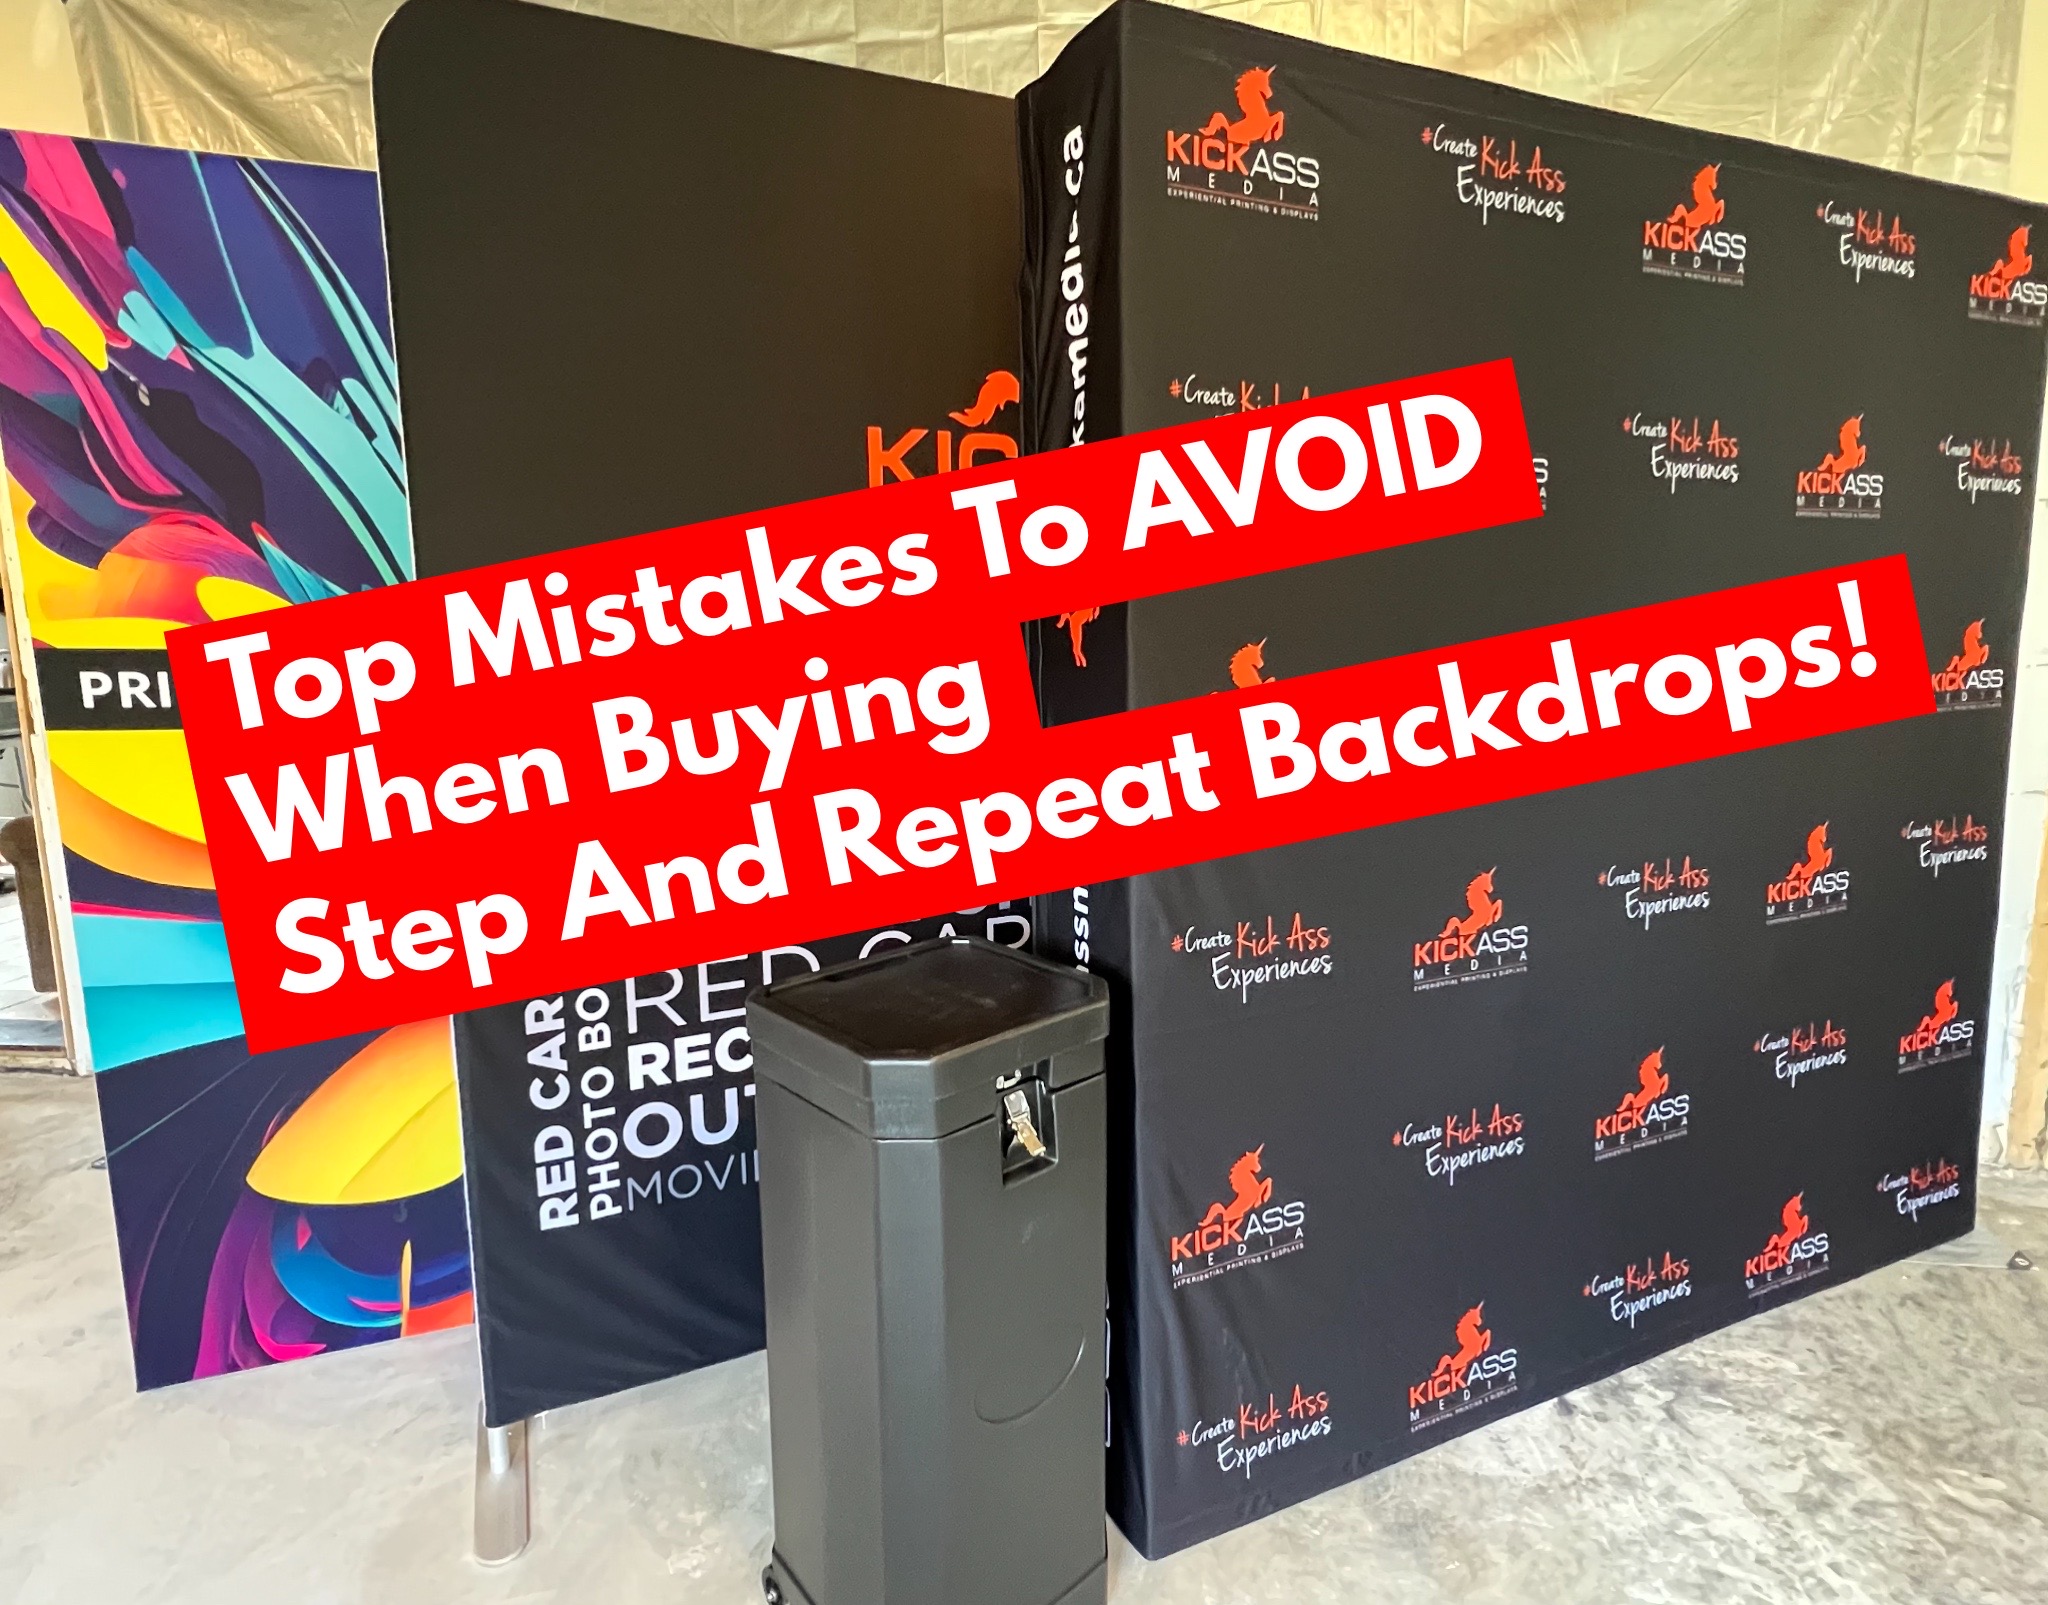 Mistakes When Buying Step and Repeats